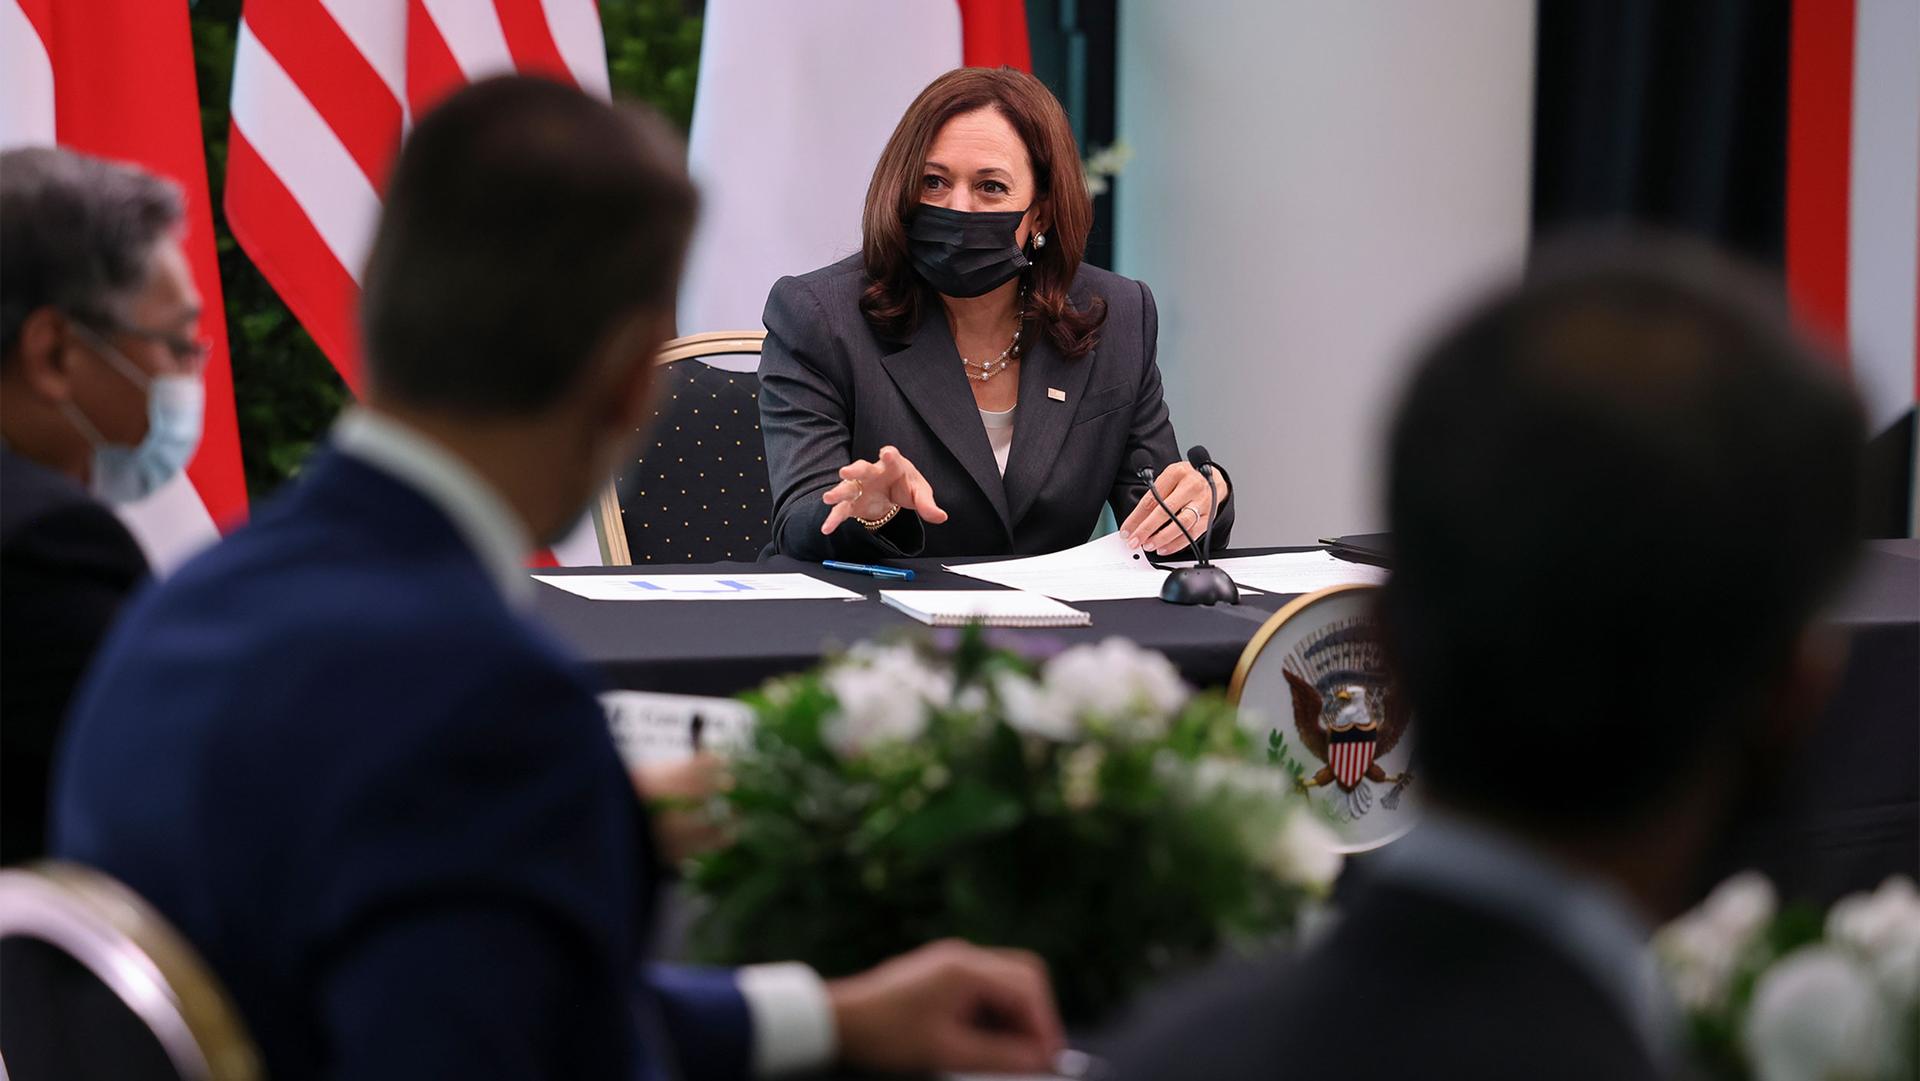 US Vice President Kamala Harris takes part in a roundtable at Gardens by the Bay in Singapore